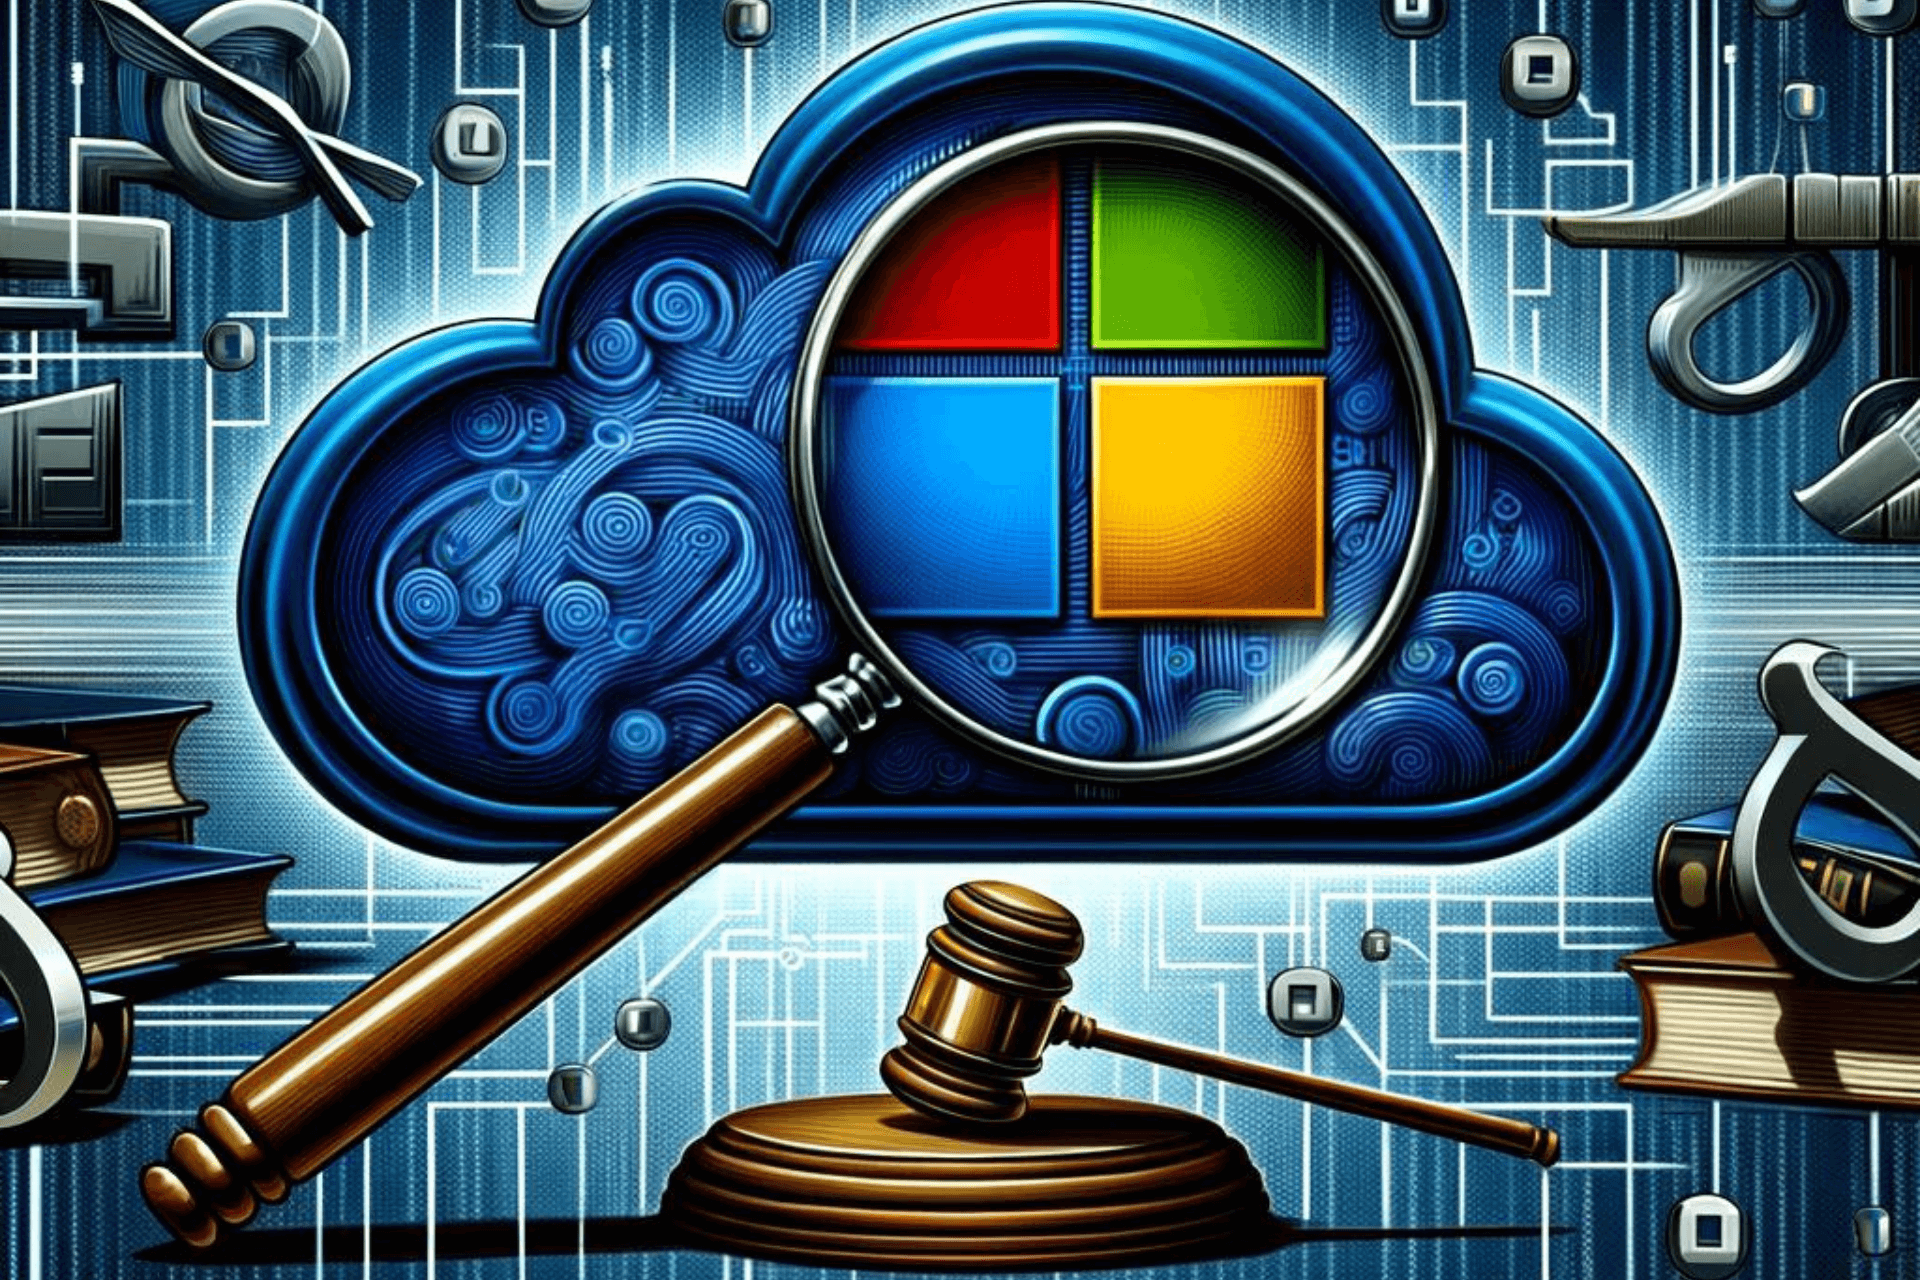 After the EU, a South African agency is investigating Microsoft for alleged anti-competitive practices